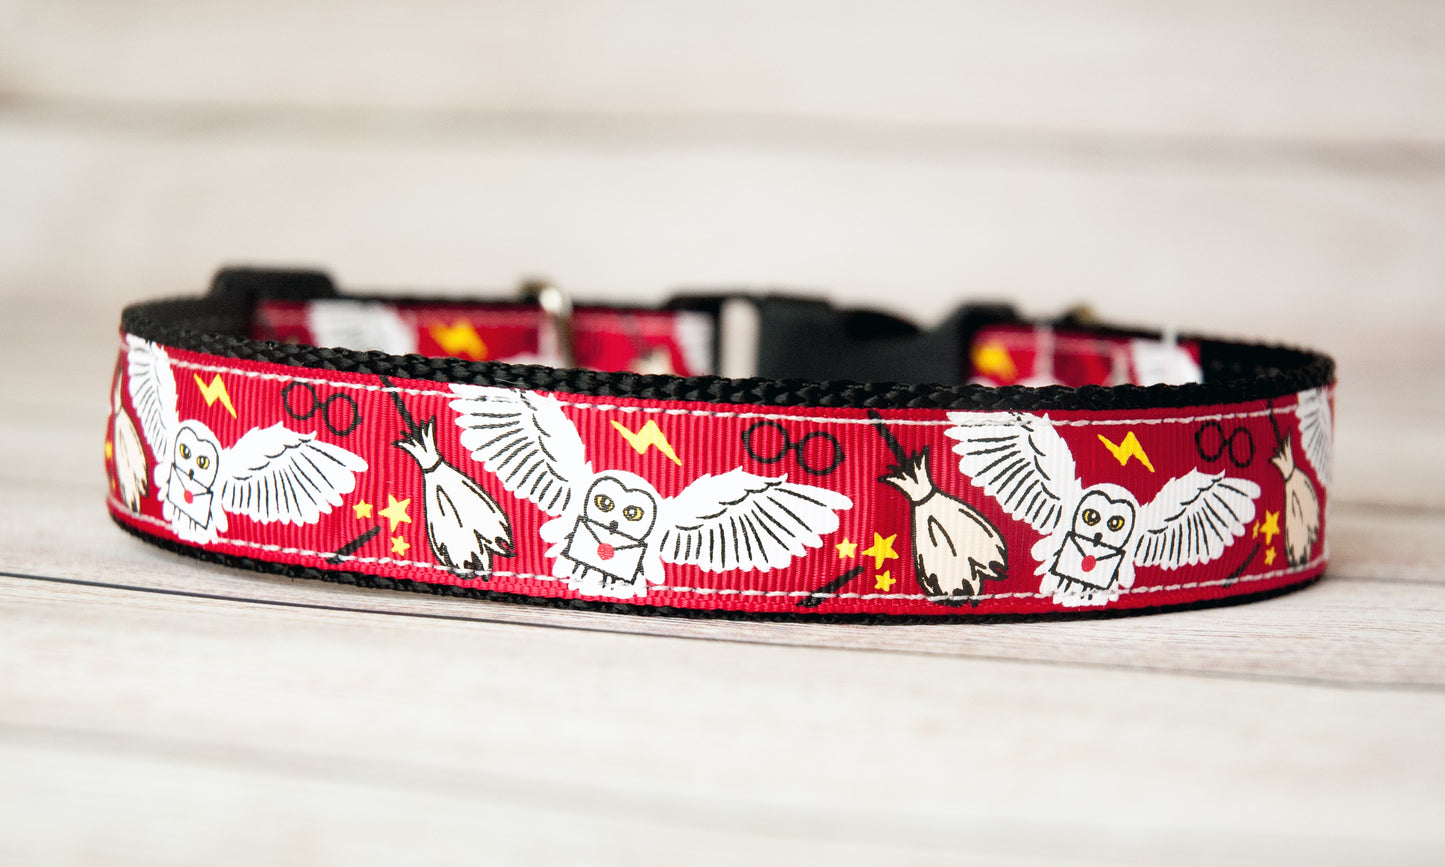 Hedwig owl and wizarding items on red background dog collar and/or leash.  1 inch wide